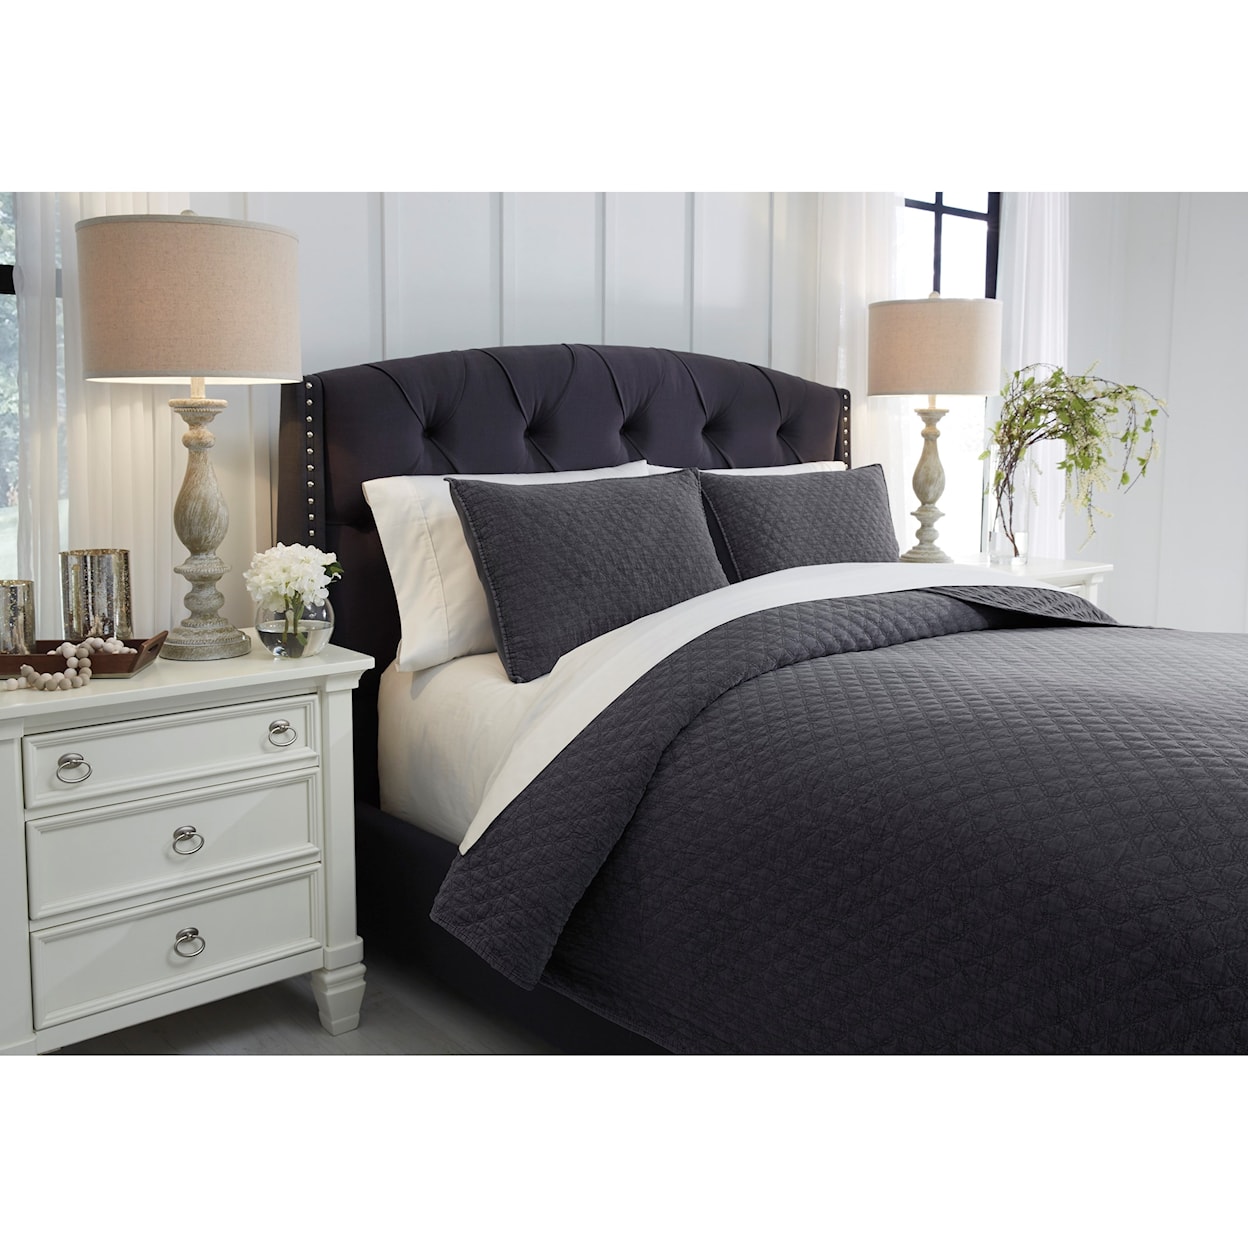 Signature Design by Ashley Bedding Sets Queen Ryter Charcoal Coverlet Set